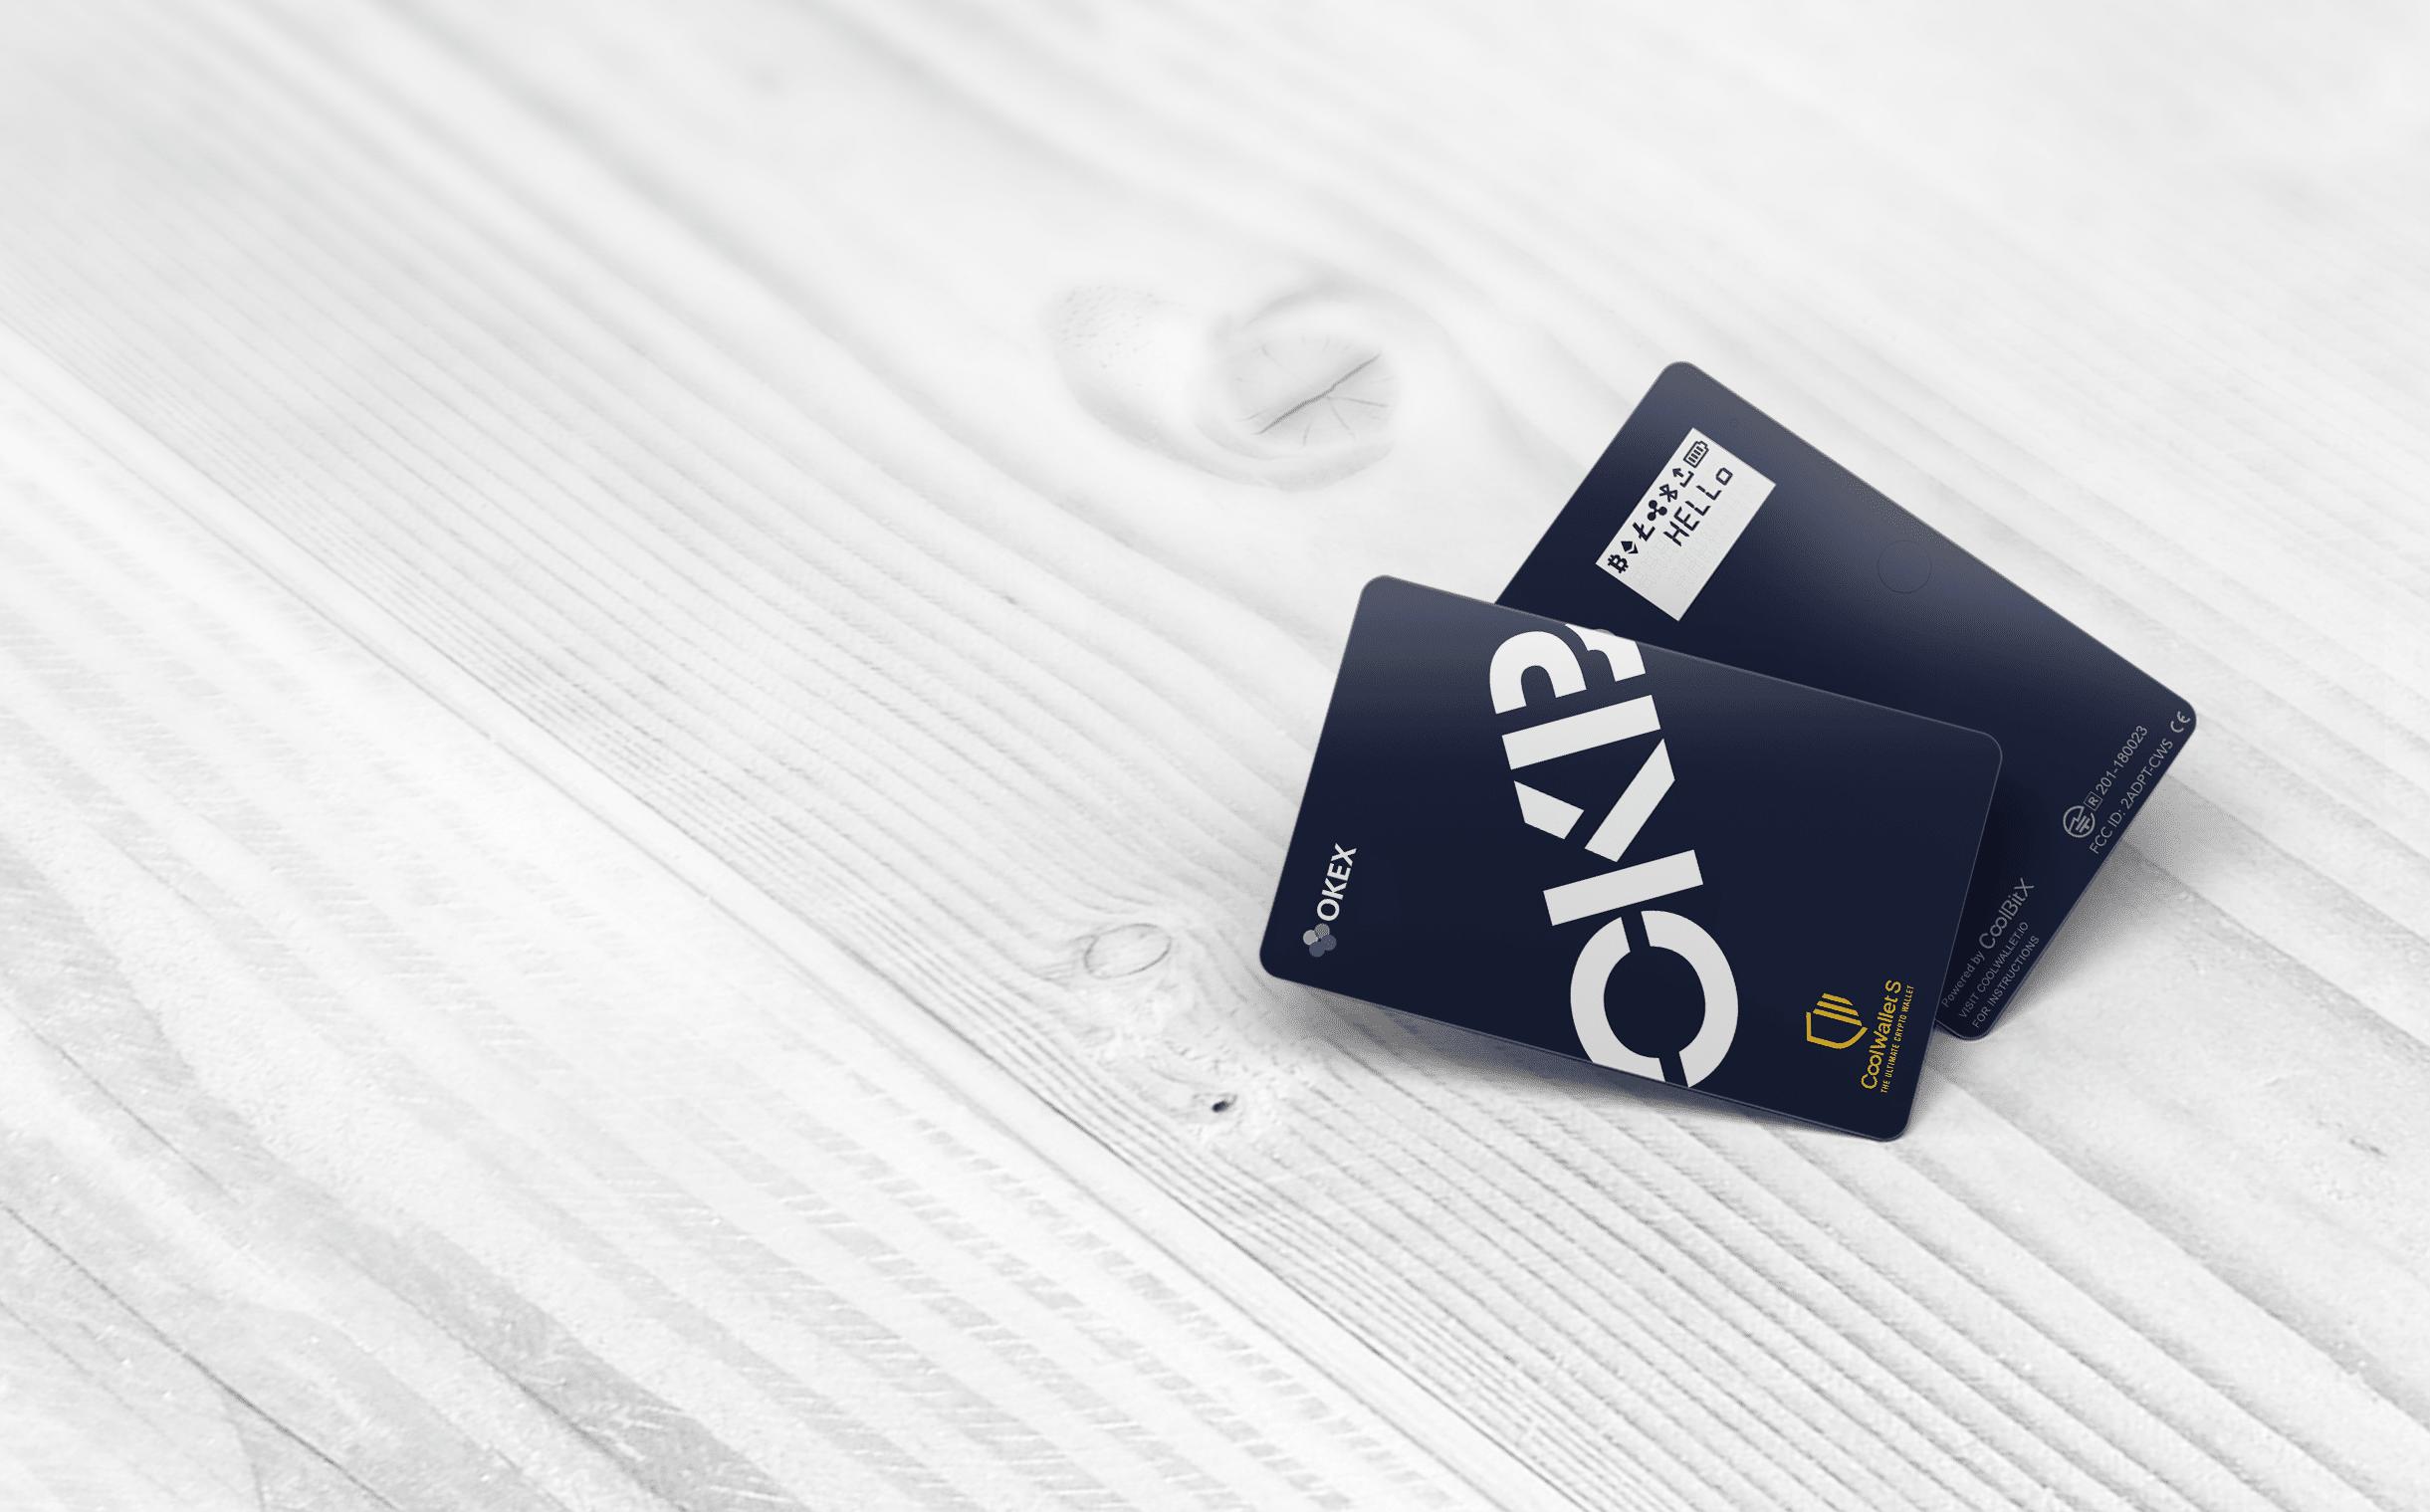 Limited Edition: OKEx x CWS - CoolWallet S